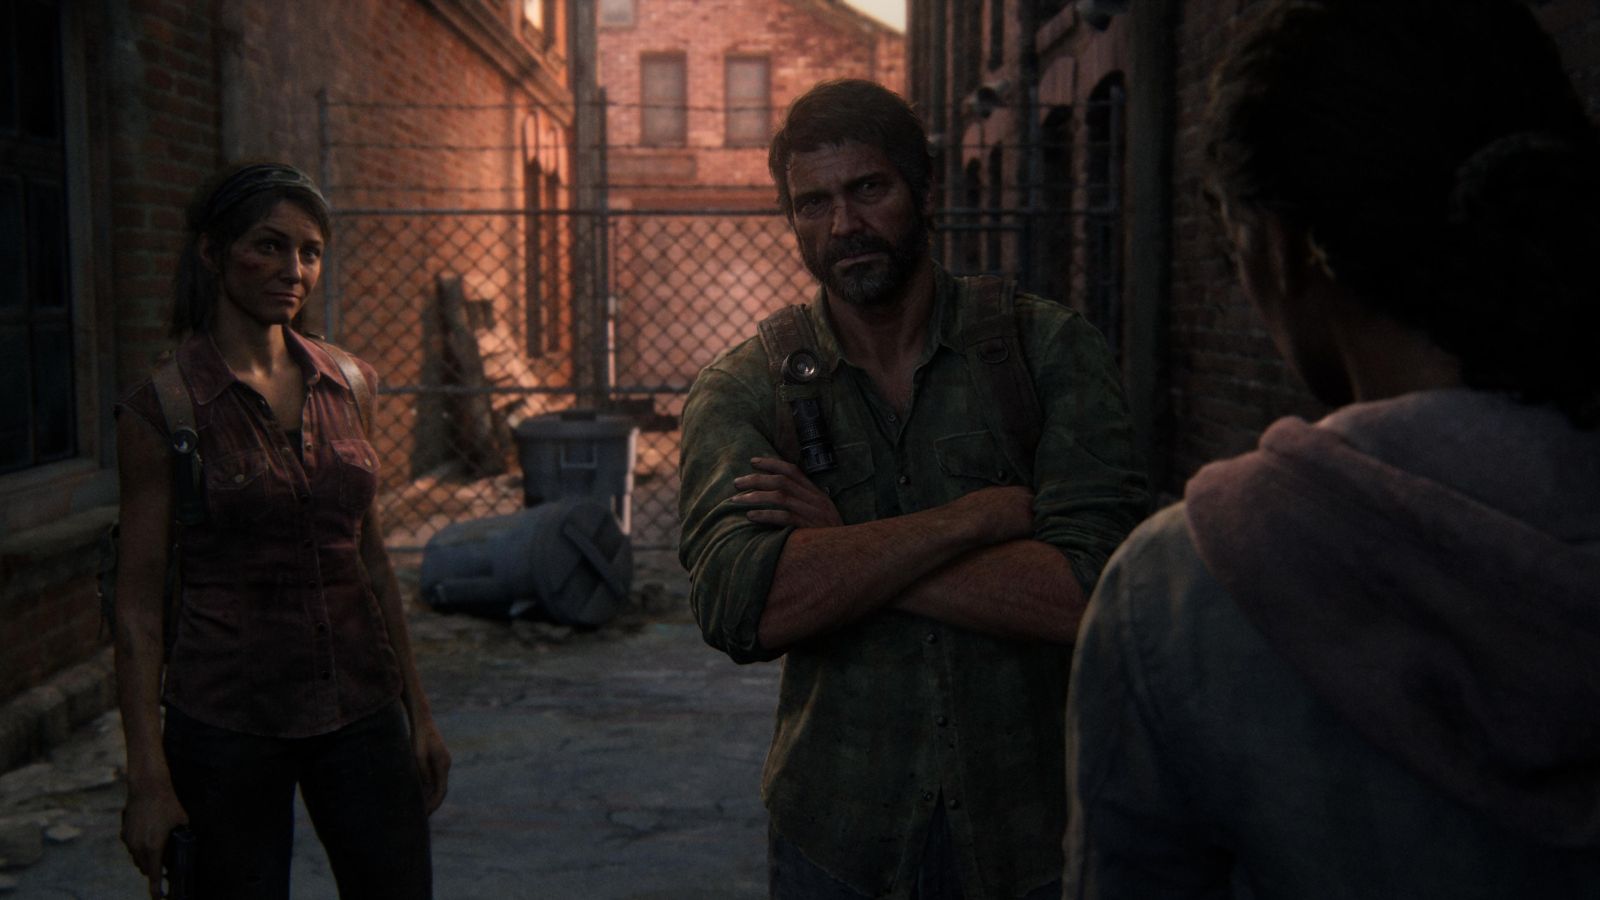 This first person mod for The Last of Us Pt. 1 on PC makes me wish